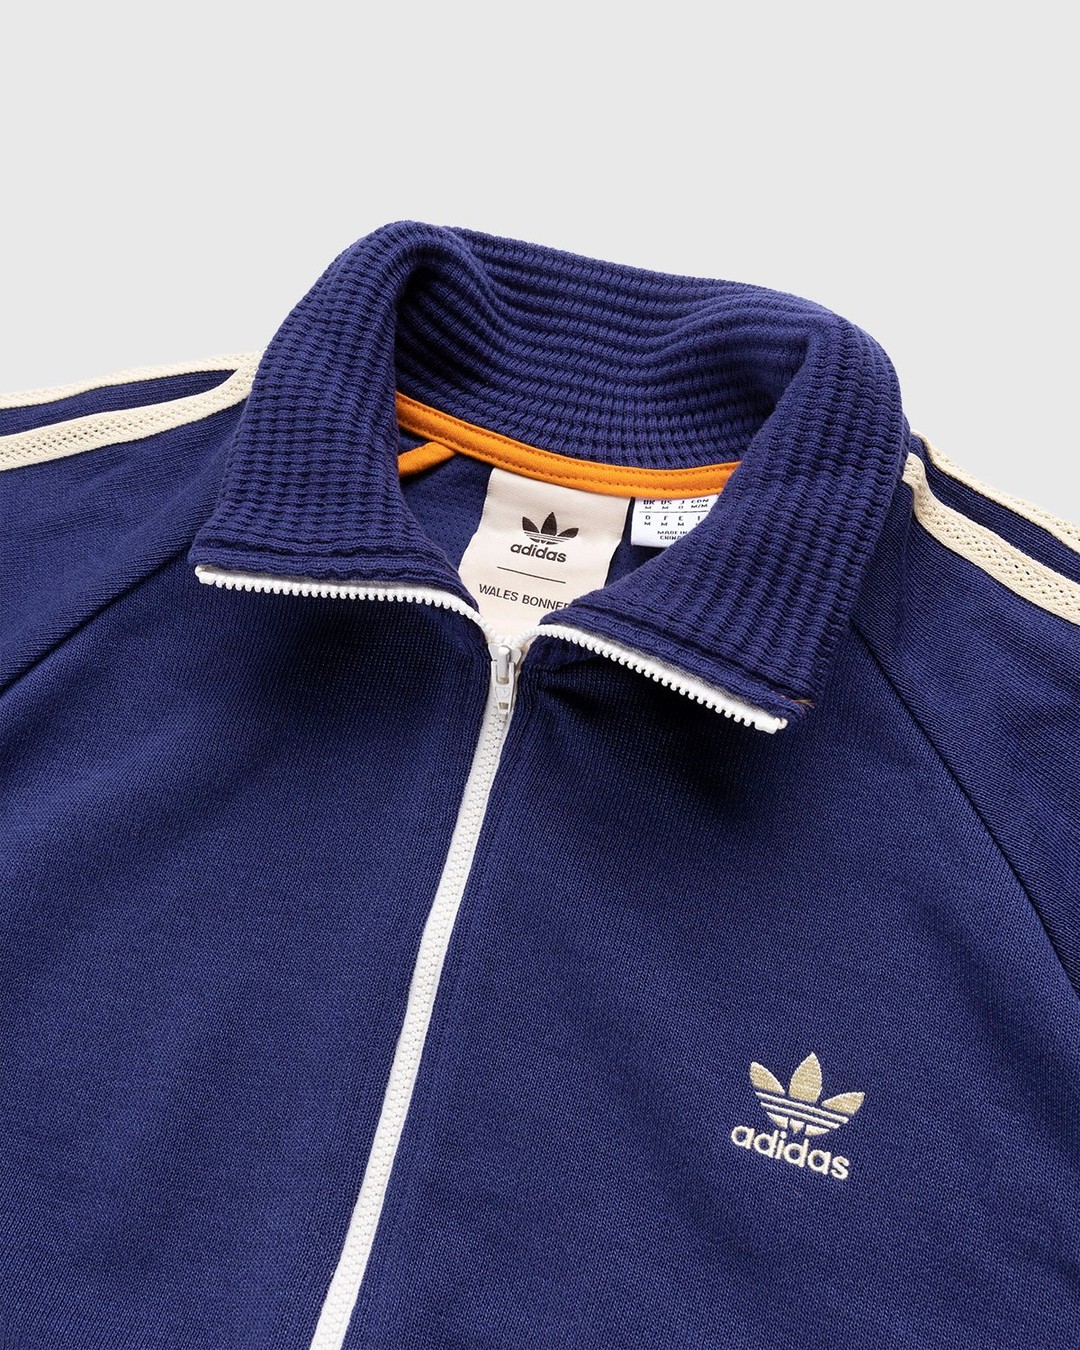 Adidas x Wales Bonner – 80s Track Top Night Sky - Outerwear - Blue - Image 3